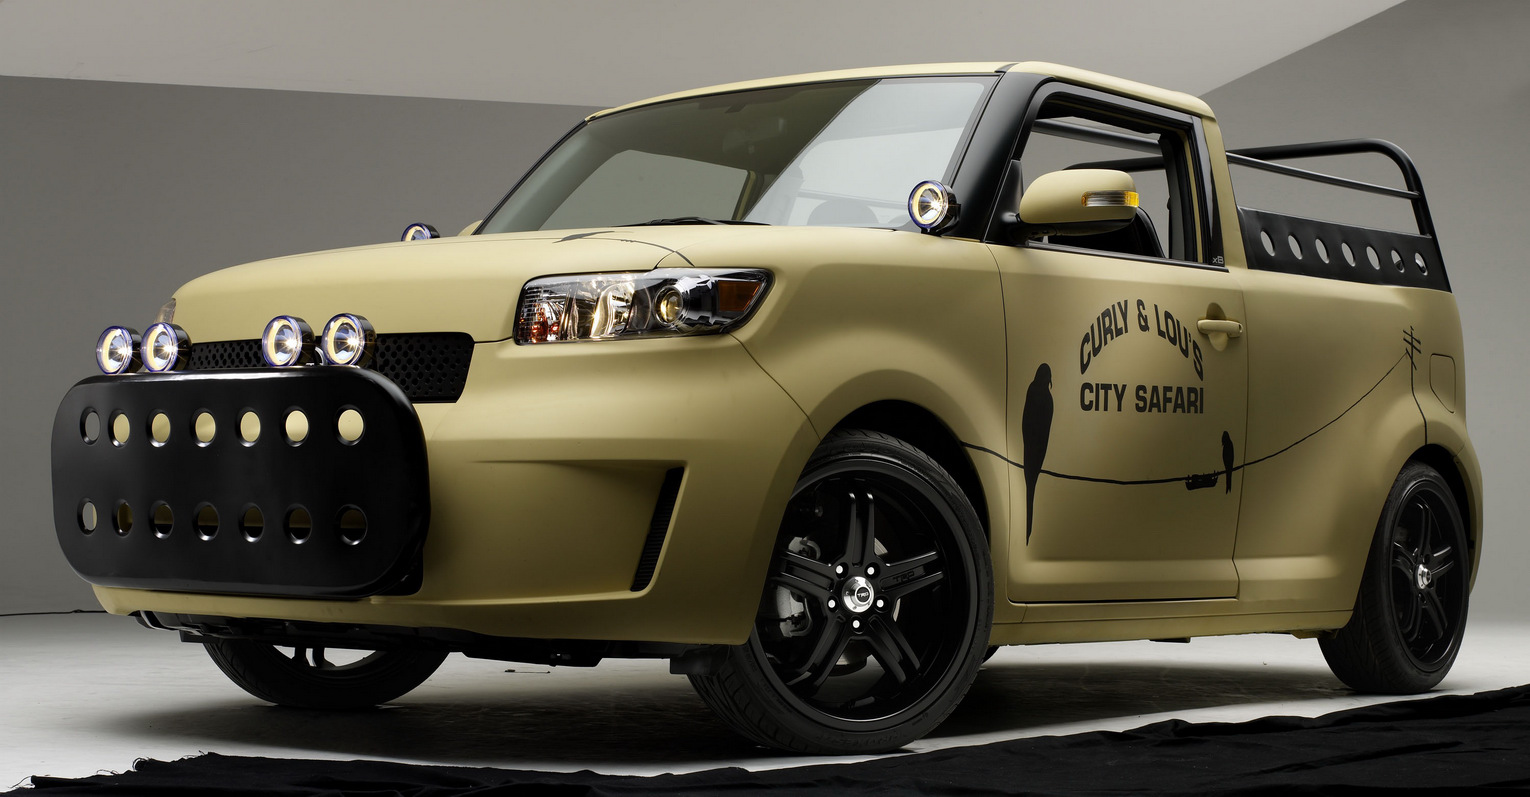 Compare Car Design: 2011 Scion xB Receives Mild Facelift, on Sale from ...